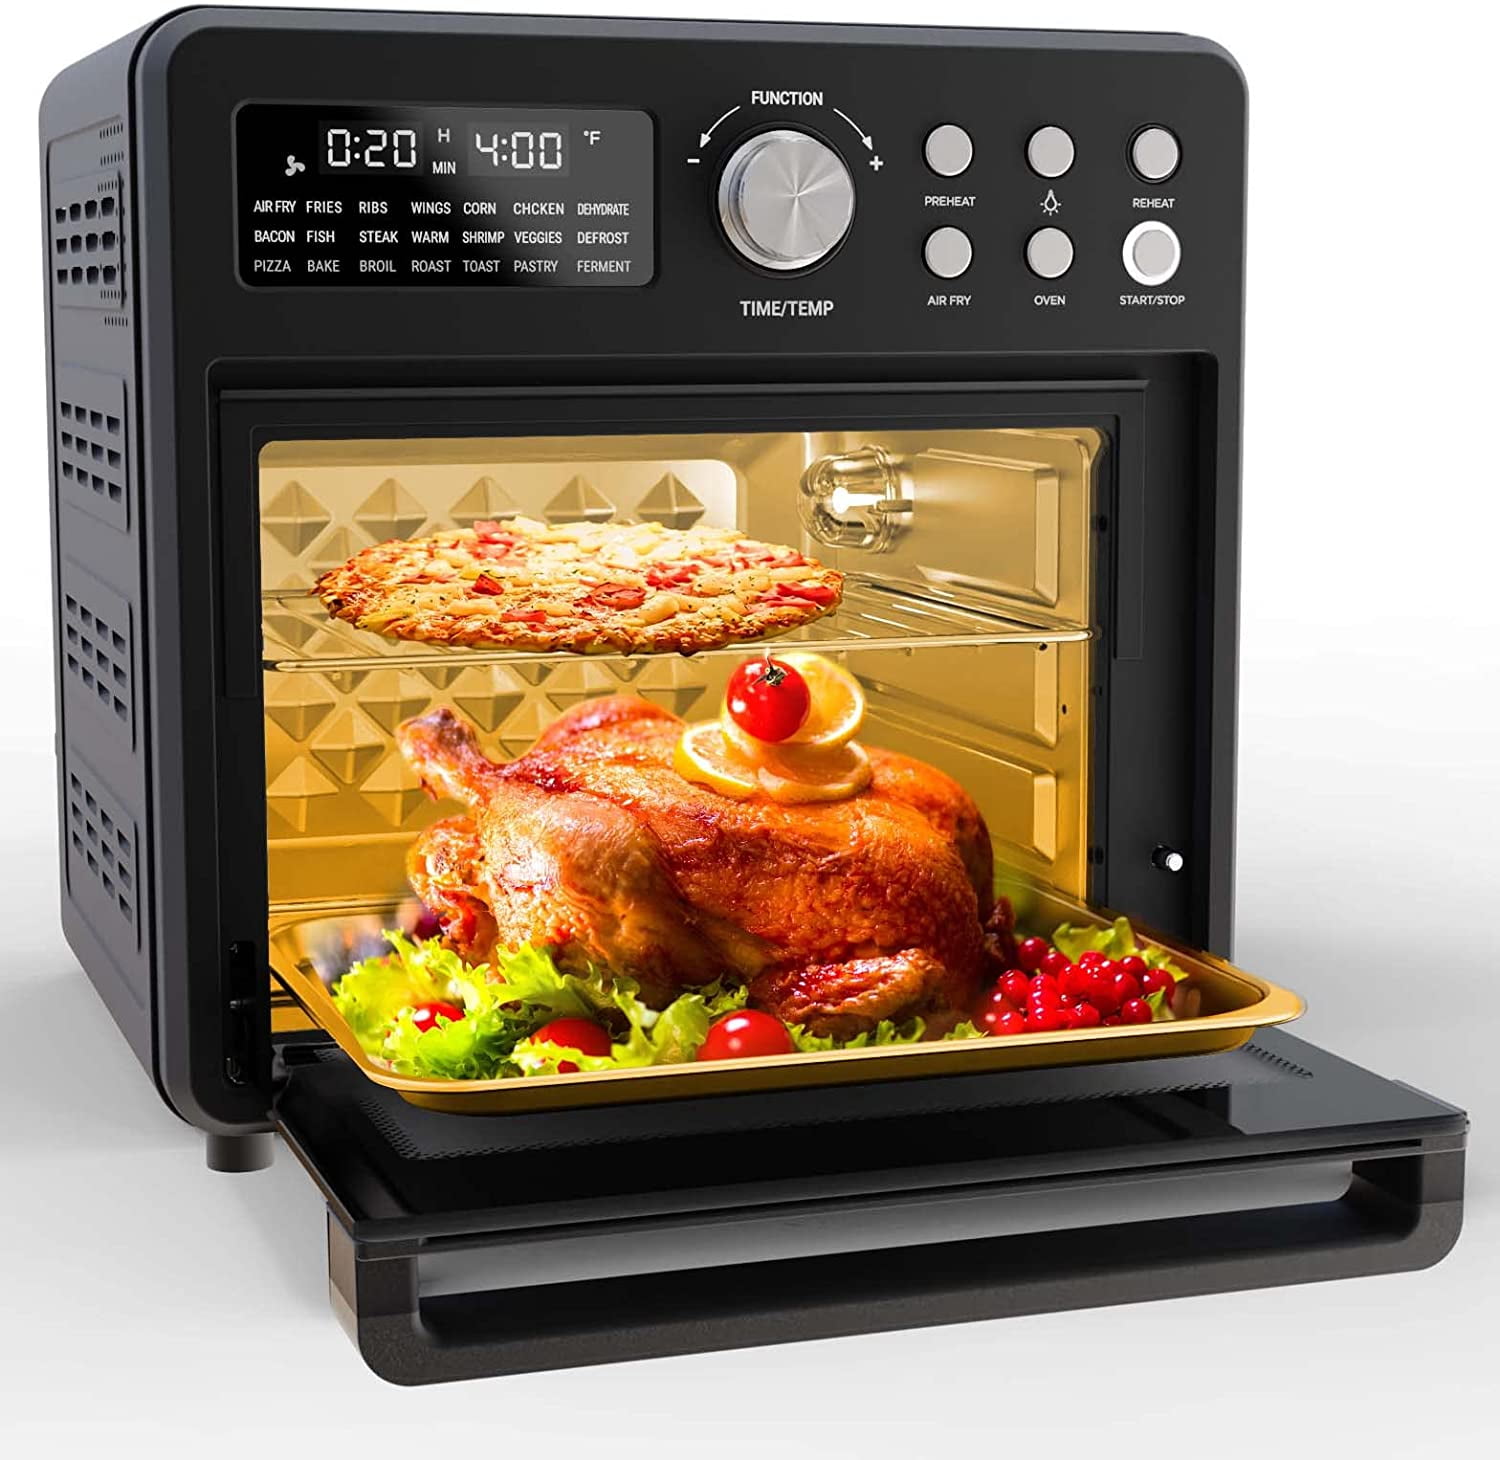 Elexnux 14 qt. Black Air Fryer Toaster Oven Combo,4 Slice Toaster Convection Air Fryer Oven Warm, 16 in 1 Digital Easy Operation